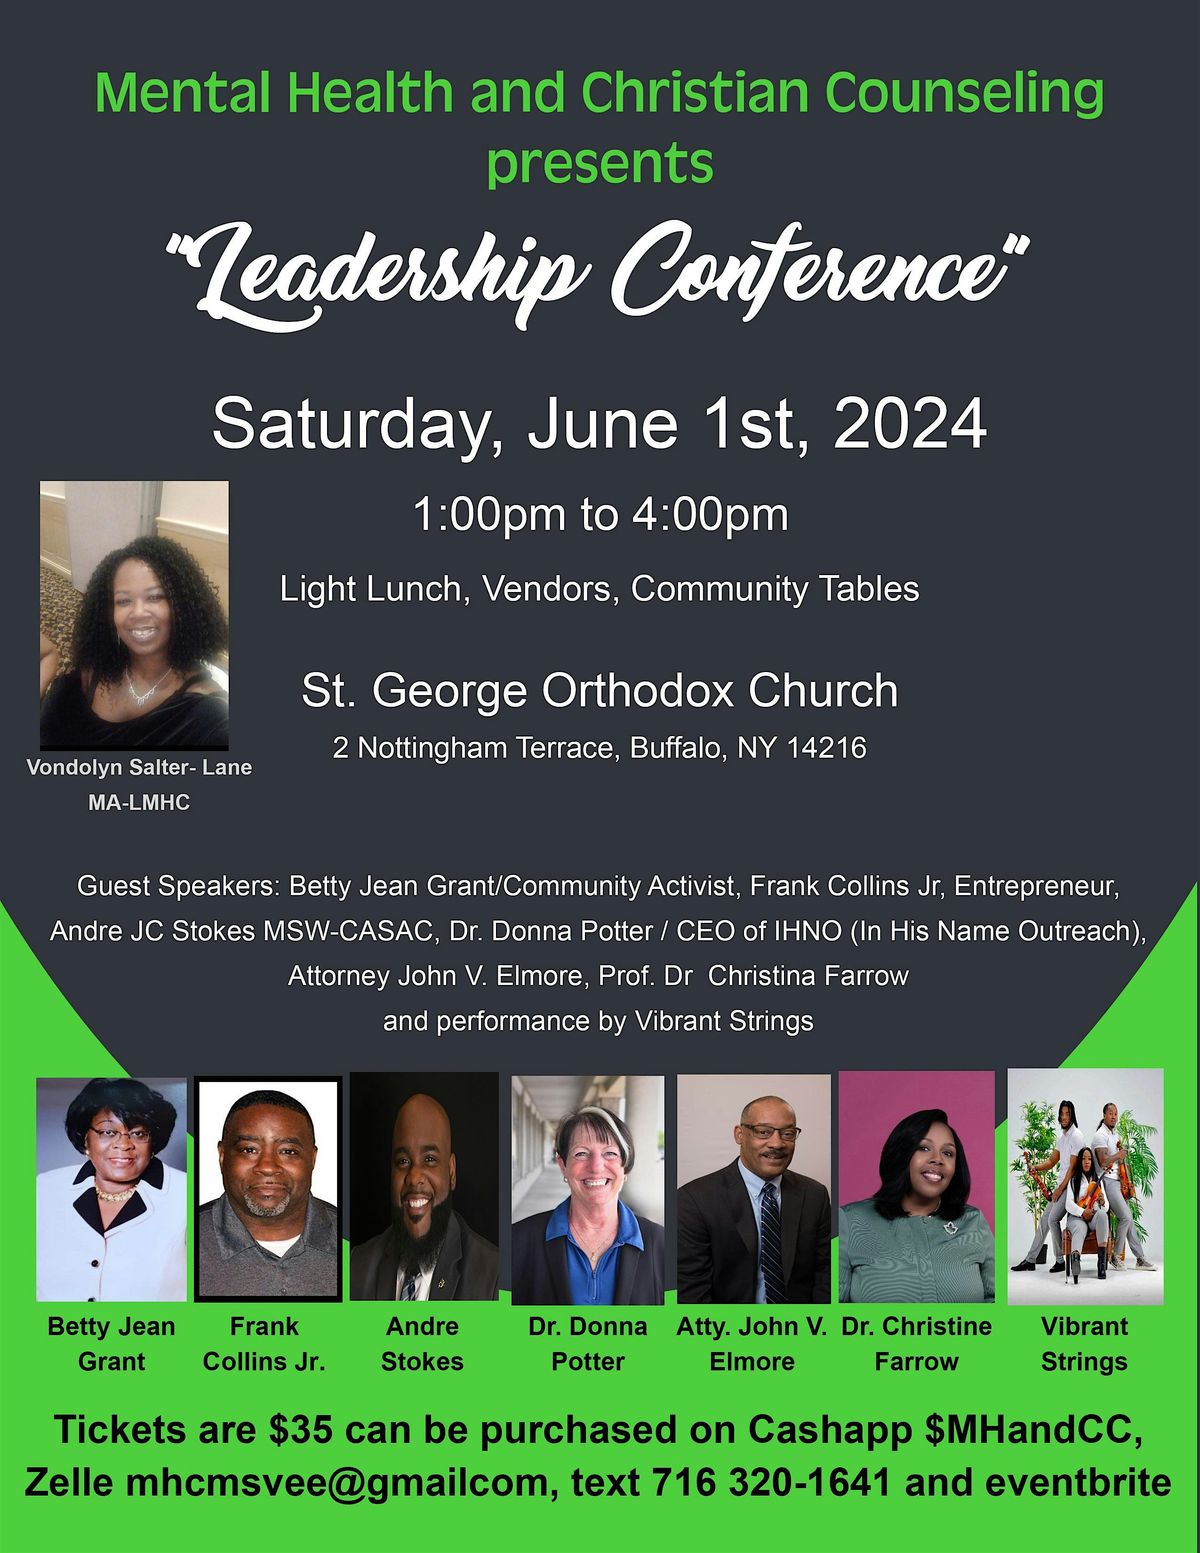 Mental Health and Christian Counseling presents "Leadership Conference"